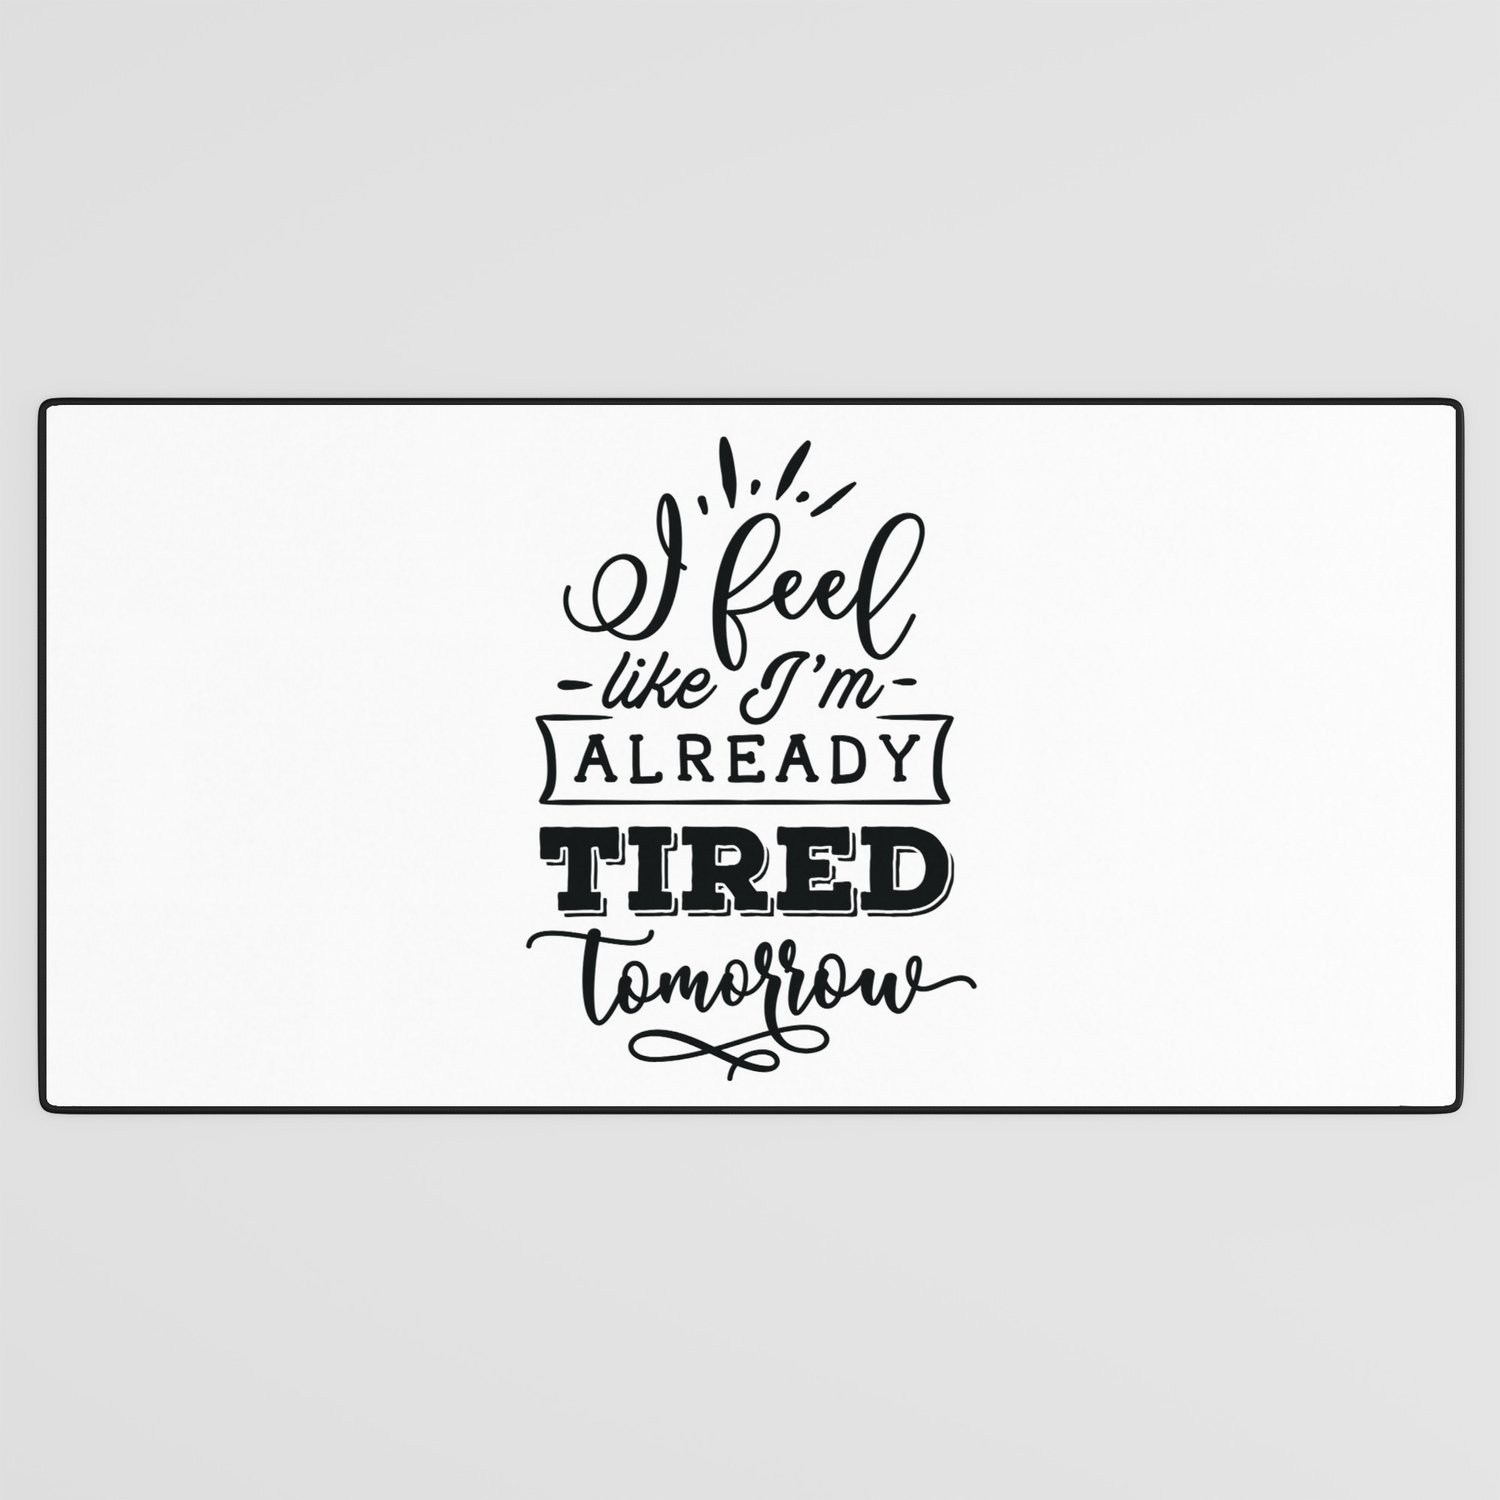 I feel like I'm already tired tomorrow - Funny hand drawn quotes  illustration. Funny humor. Life sayings. Desk Mat by The Life Quotes |  Society6